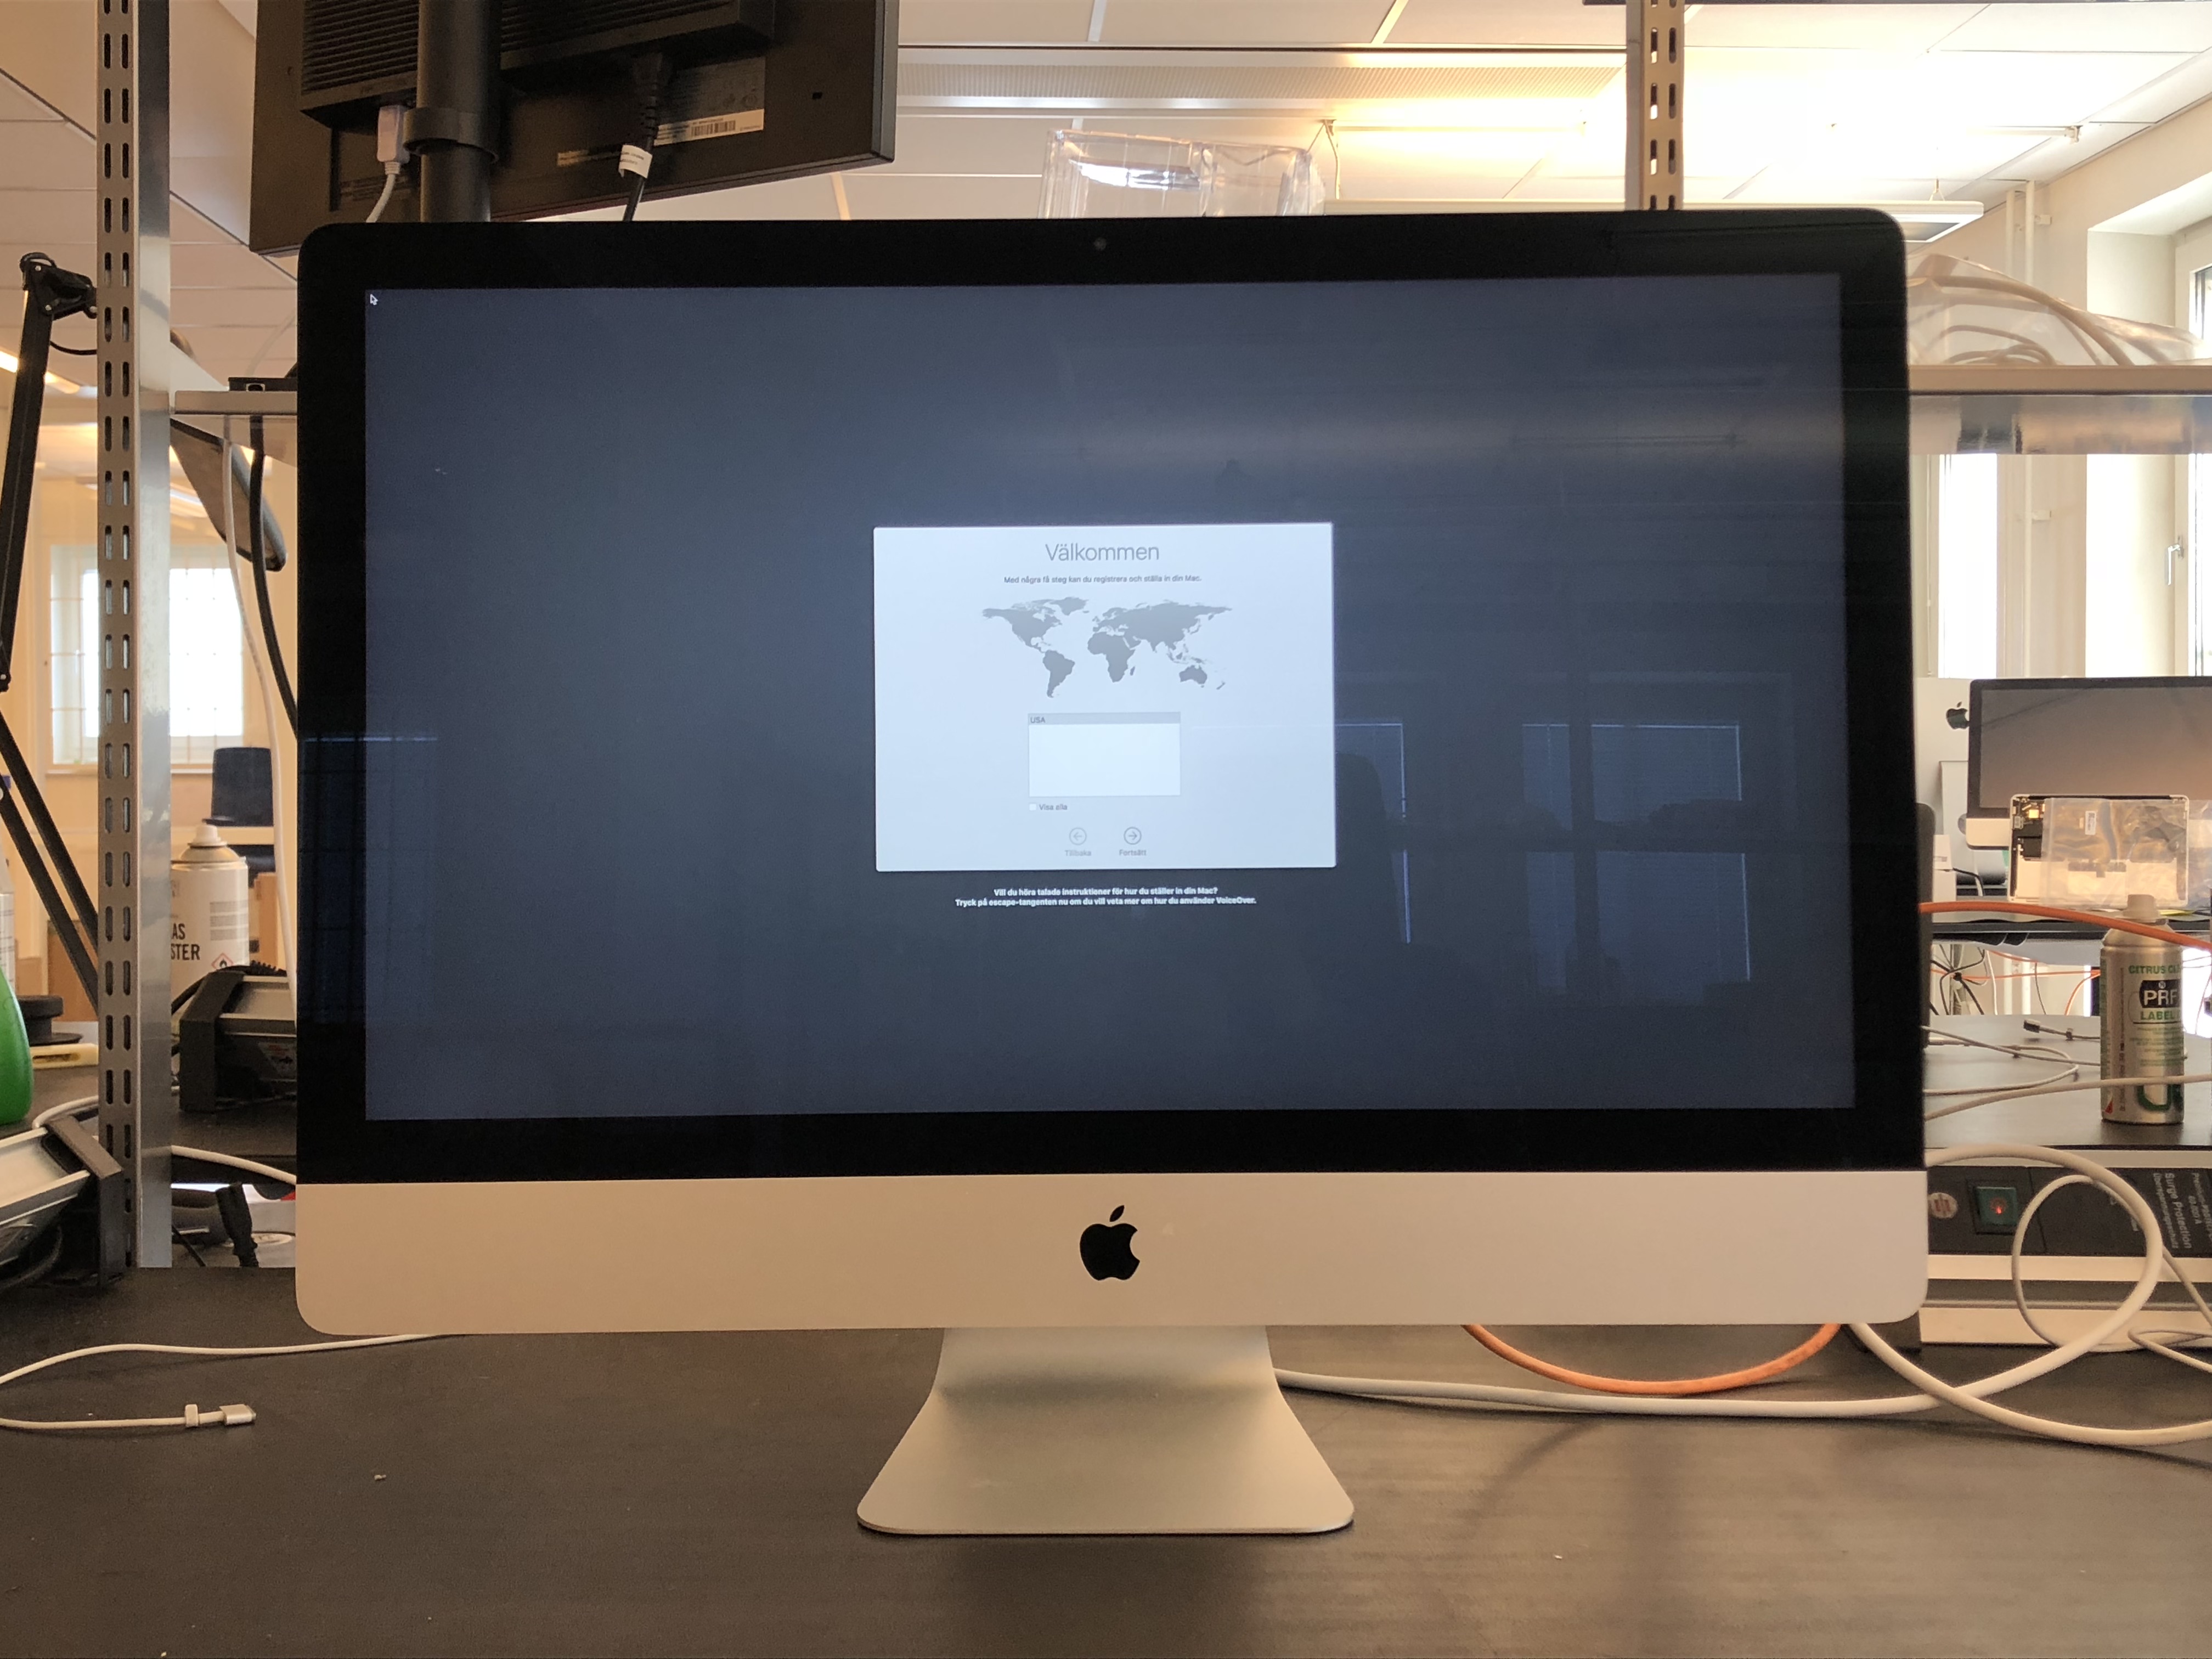 how to open imac 27 late 2013